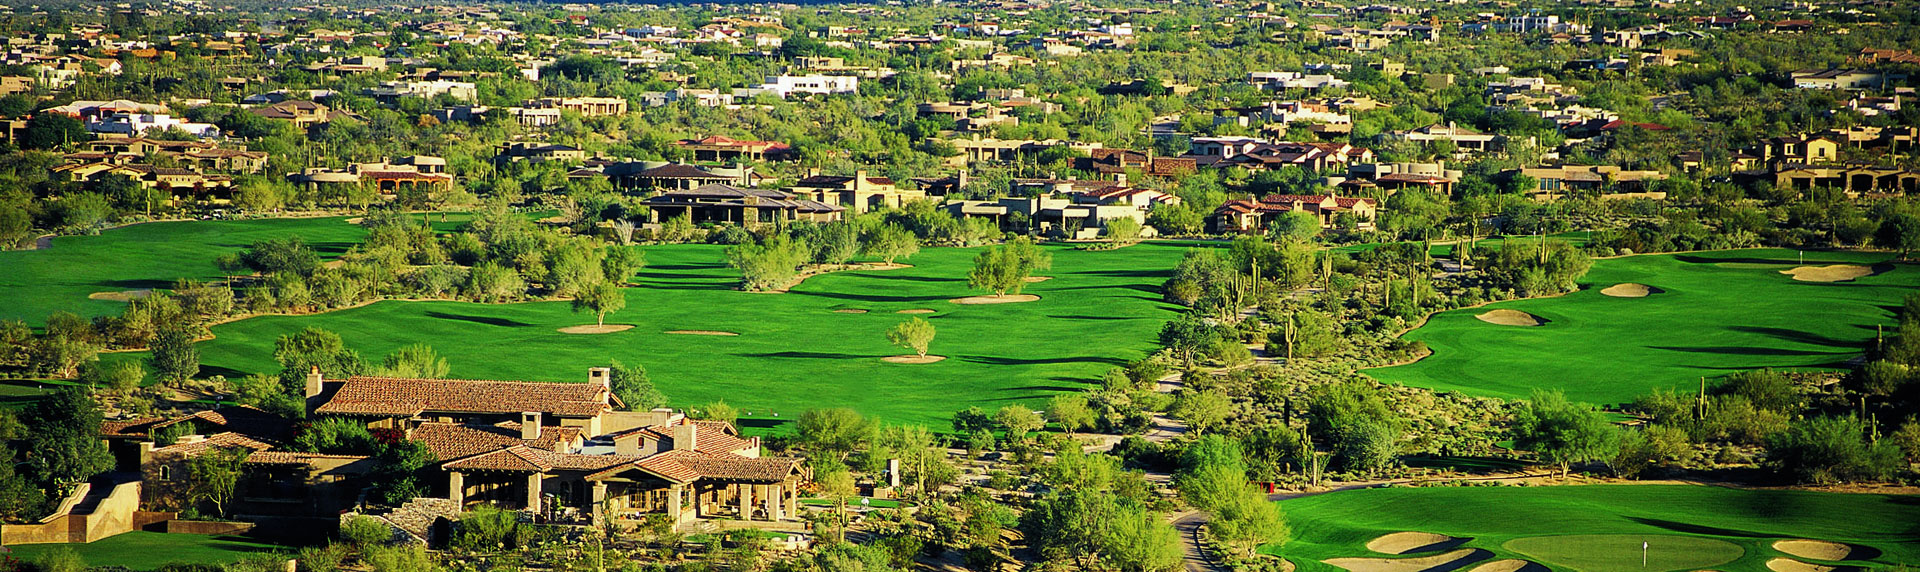 Overview image of golf course